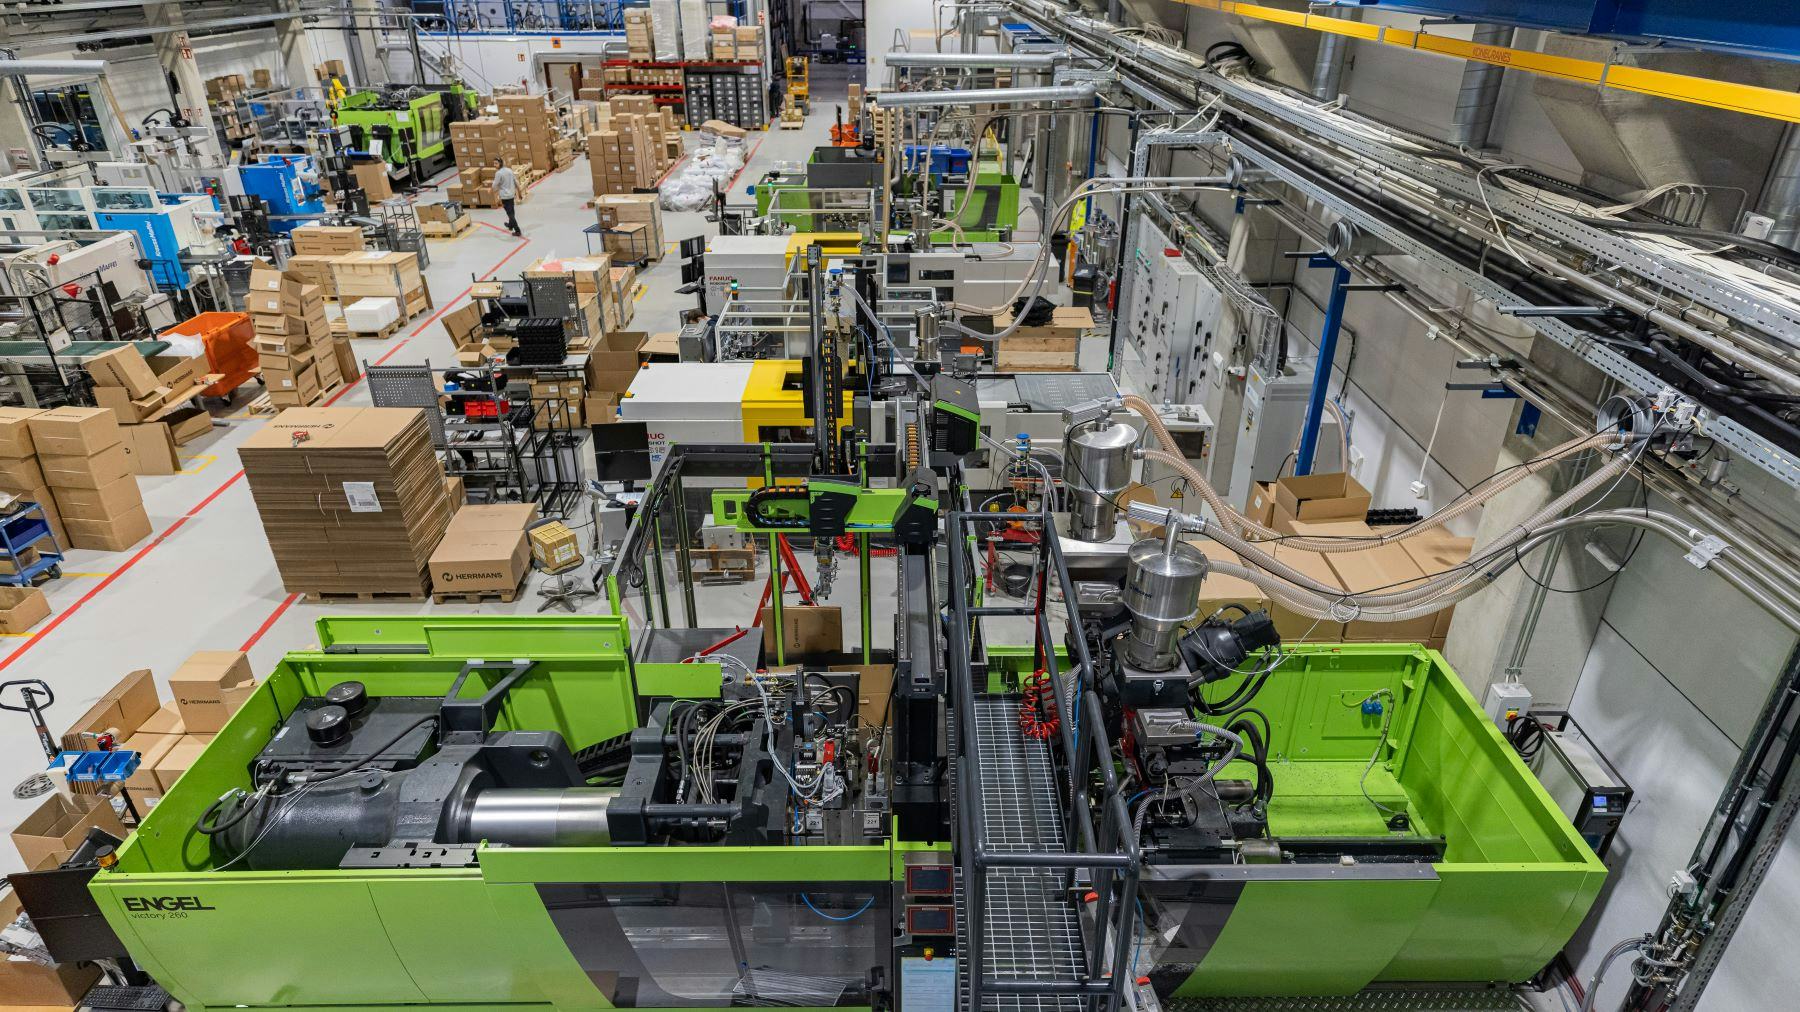 “Automation is key to produce efficiently, but you need certain volumes and modular built products to facilitate the true value of automation,” explains Herrmans CEO Dan Liljeqvist from the company’s headquarters in Finland. – Photos Herrmans